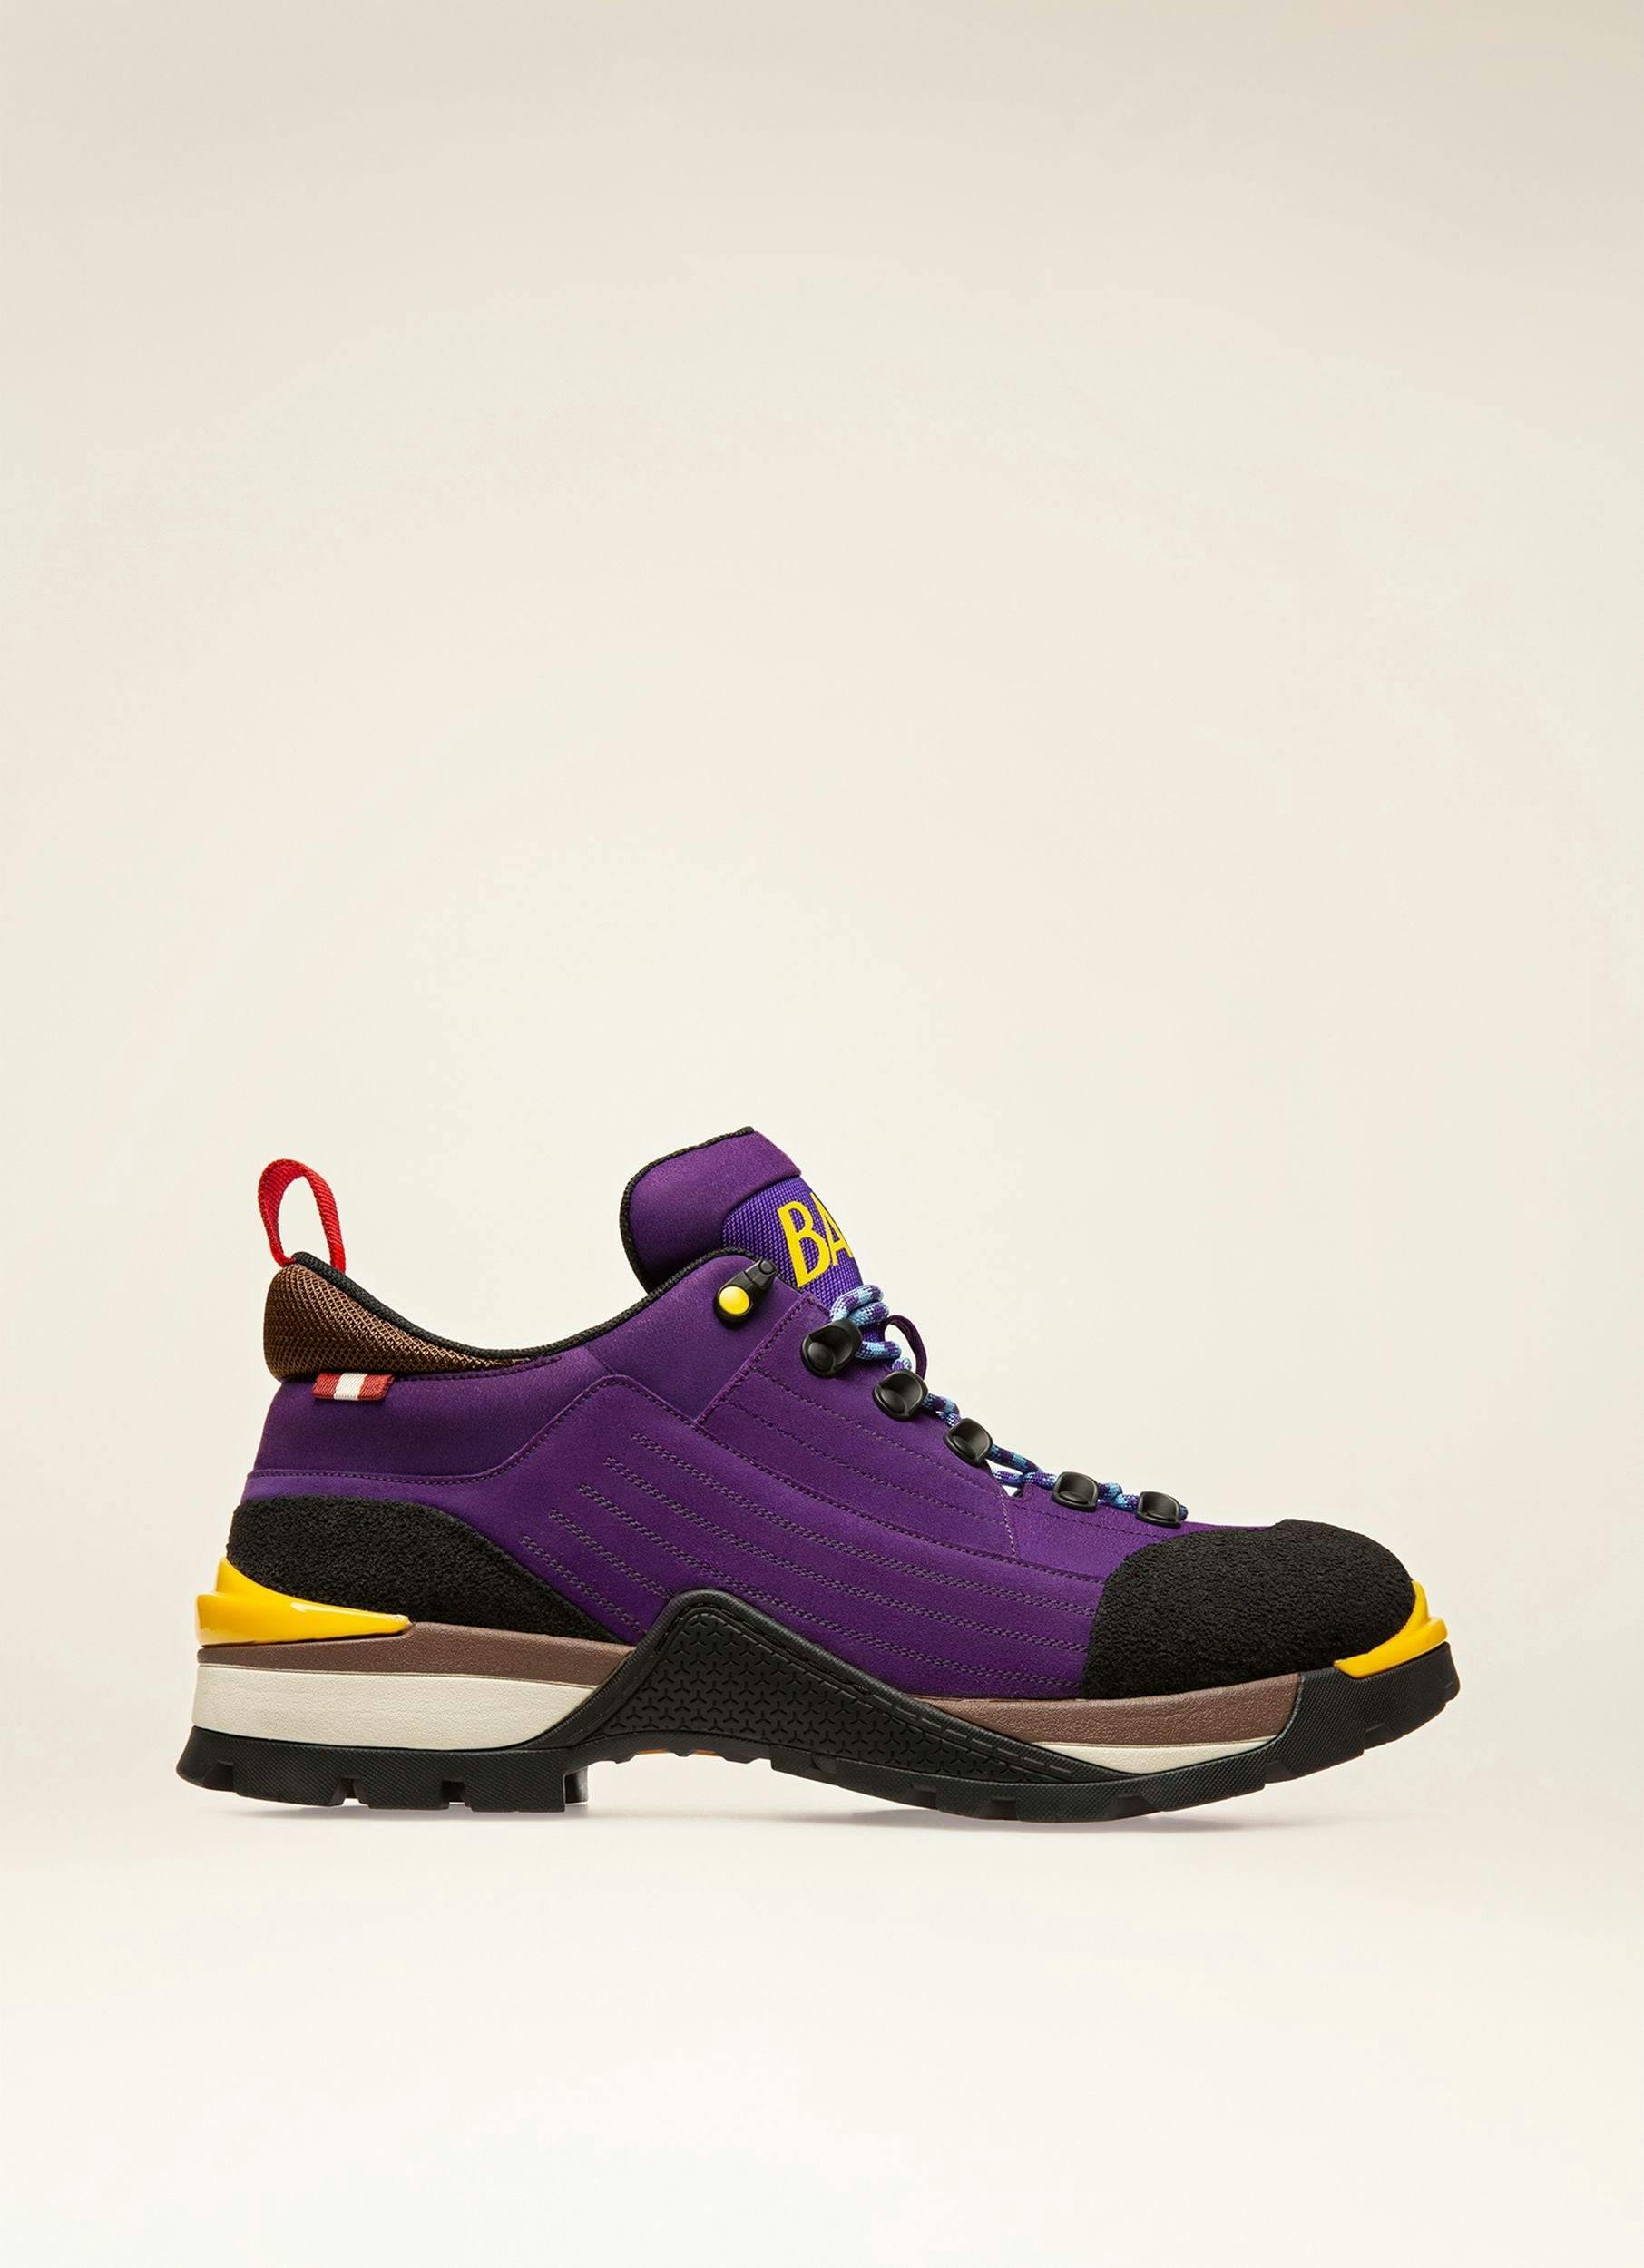 BALLY HIKE Suede Hiking Shoes In Purple - Men's - Bally - 01